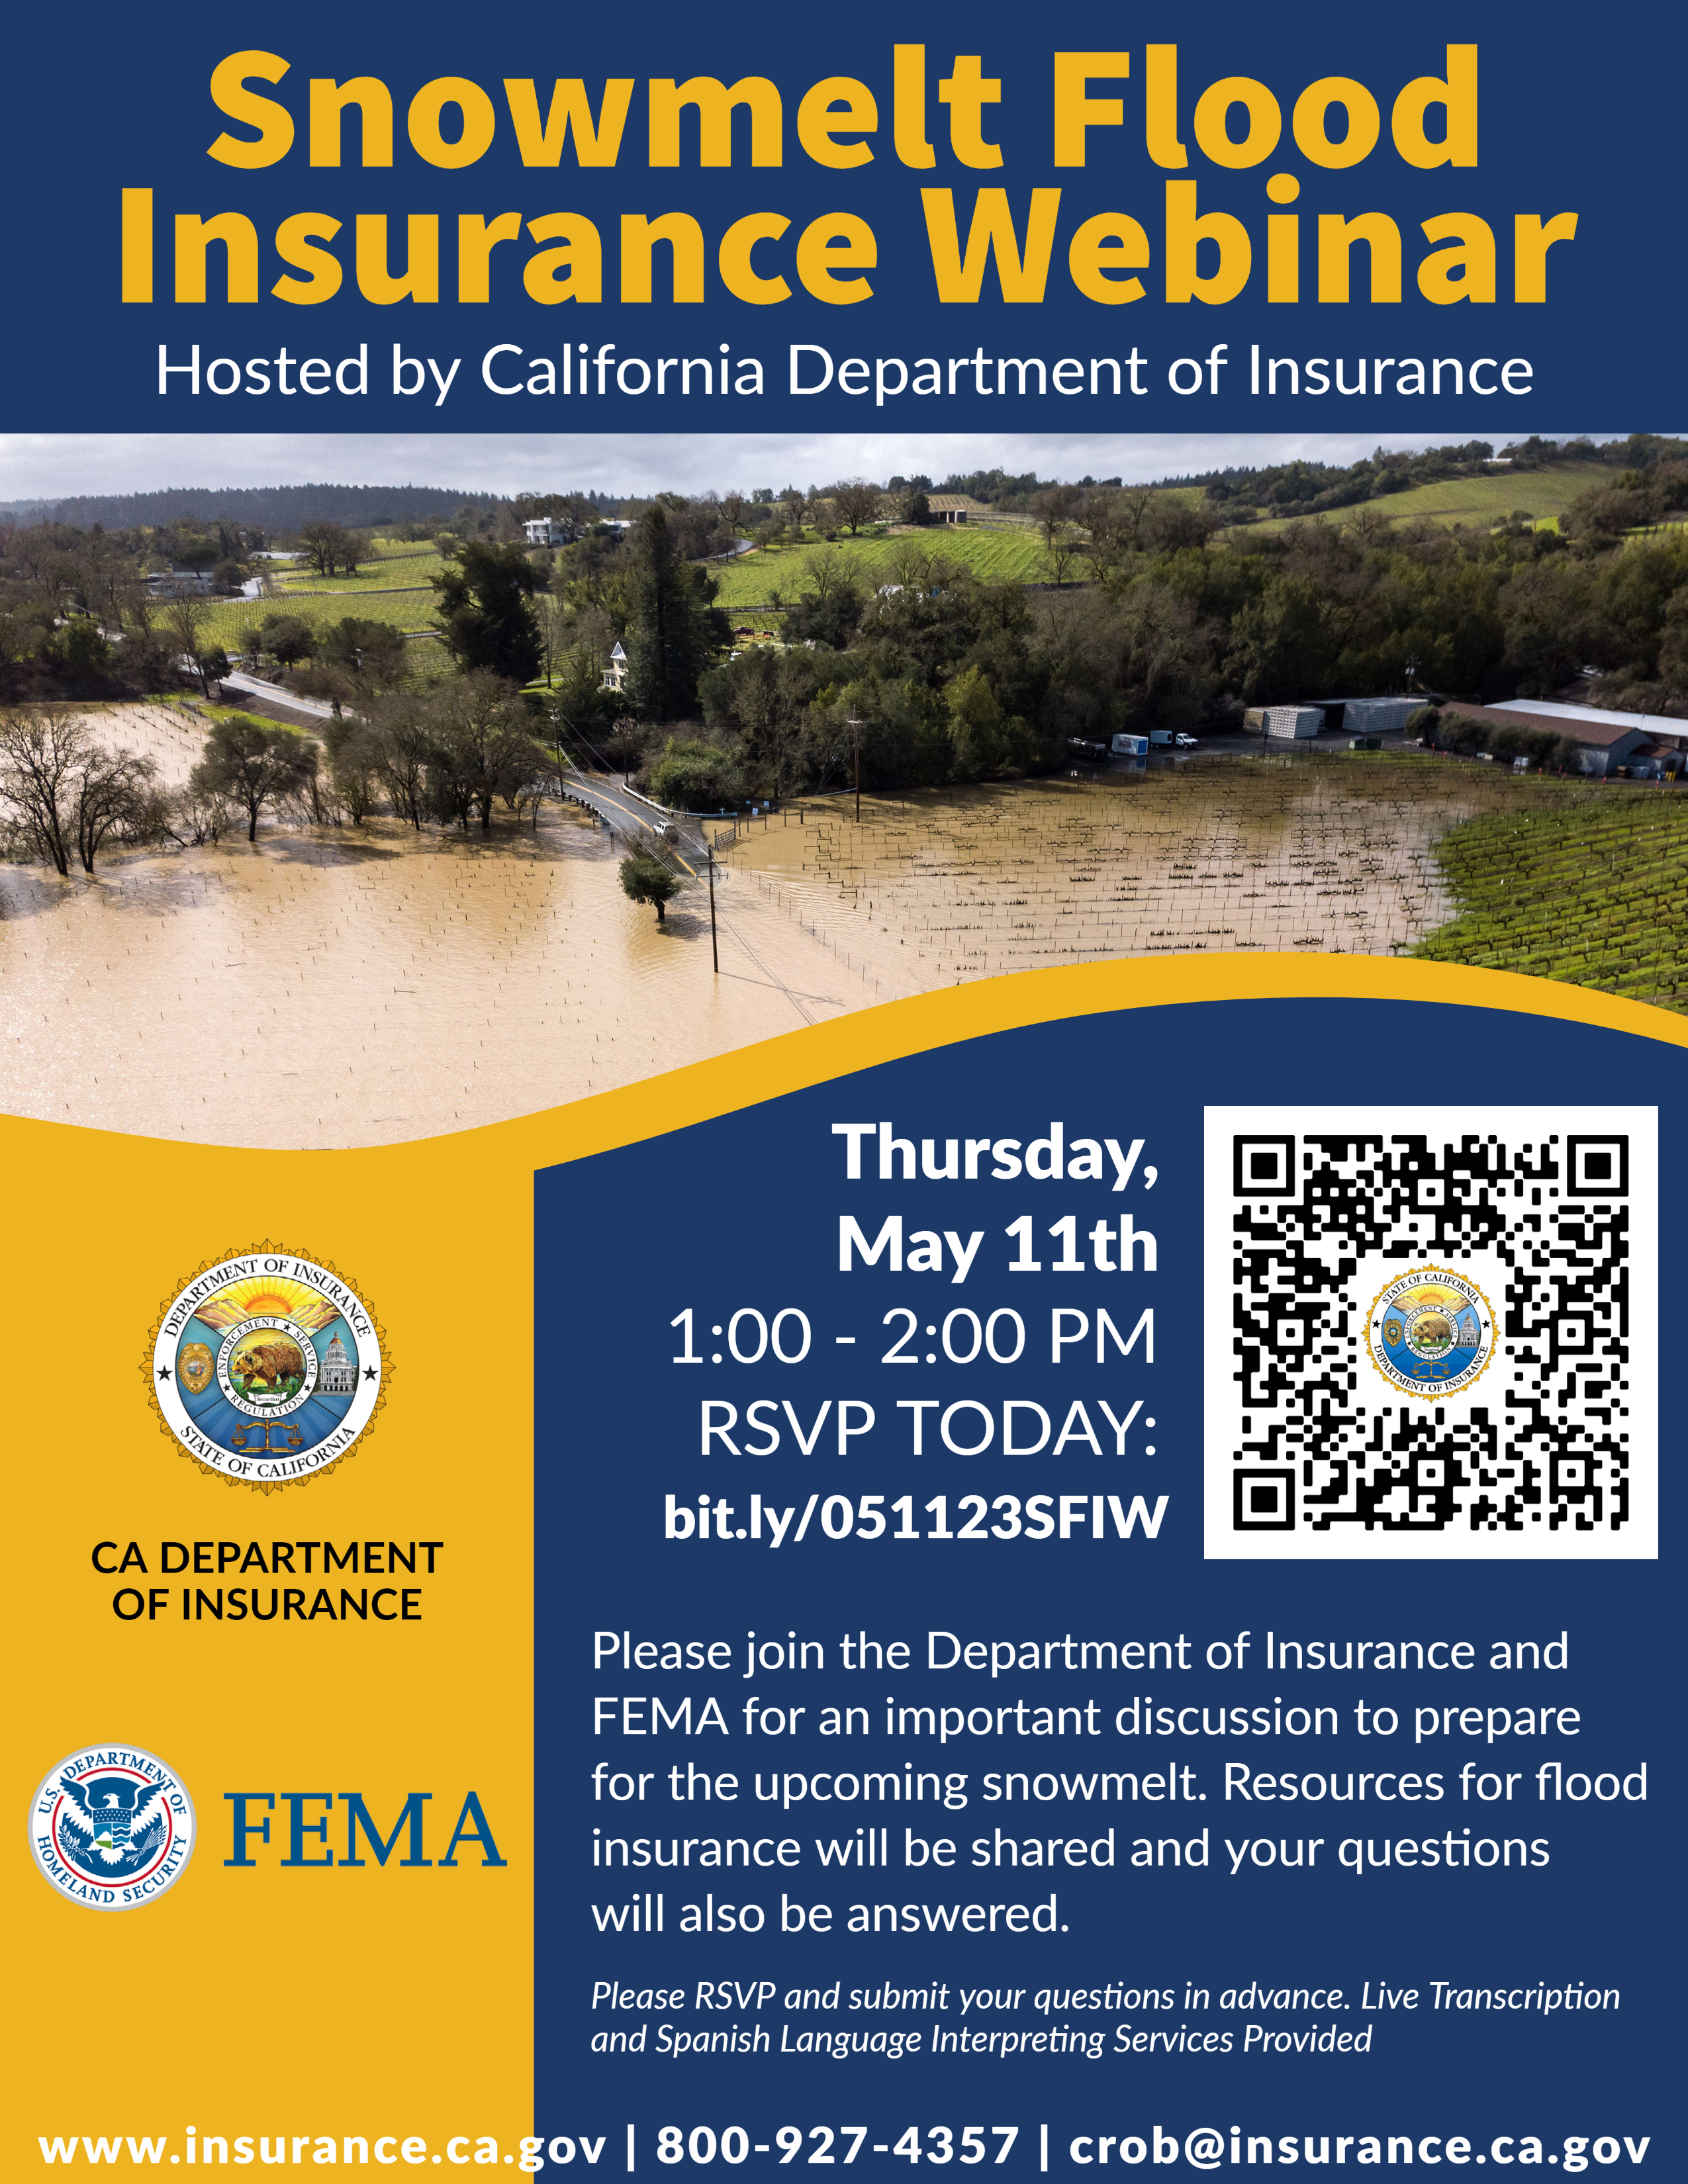 Please join the Department of Insurance and FEMA for an important discussion to prepare for the upcoming snowmelt. Resources for flood insurance will be shared and your questions will also be answered. 